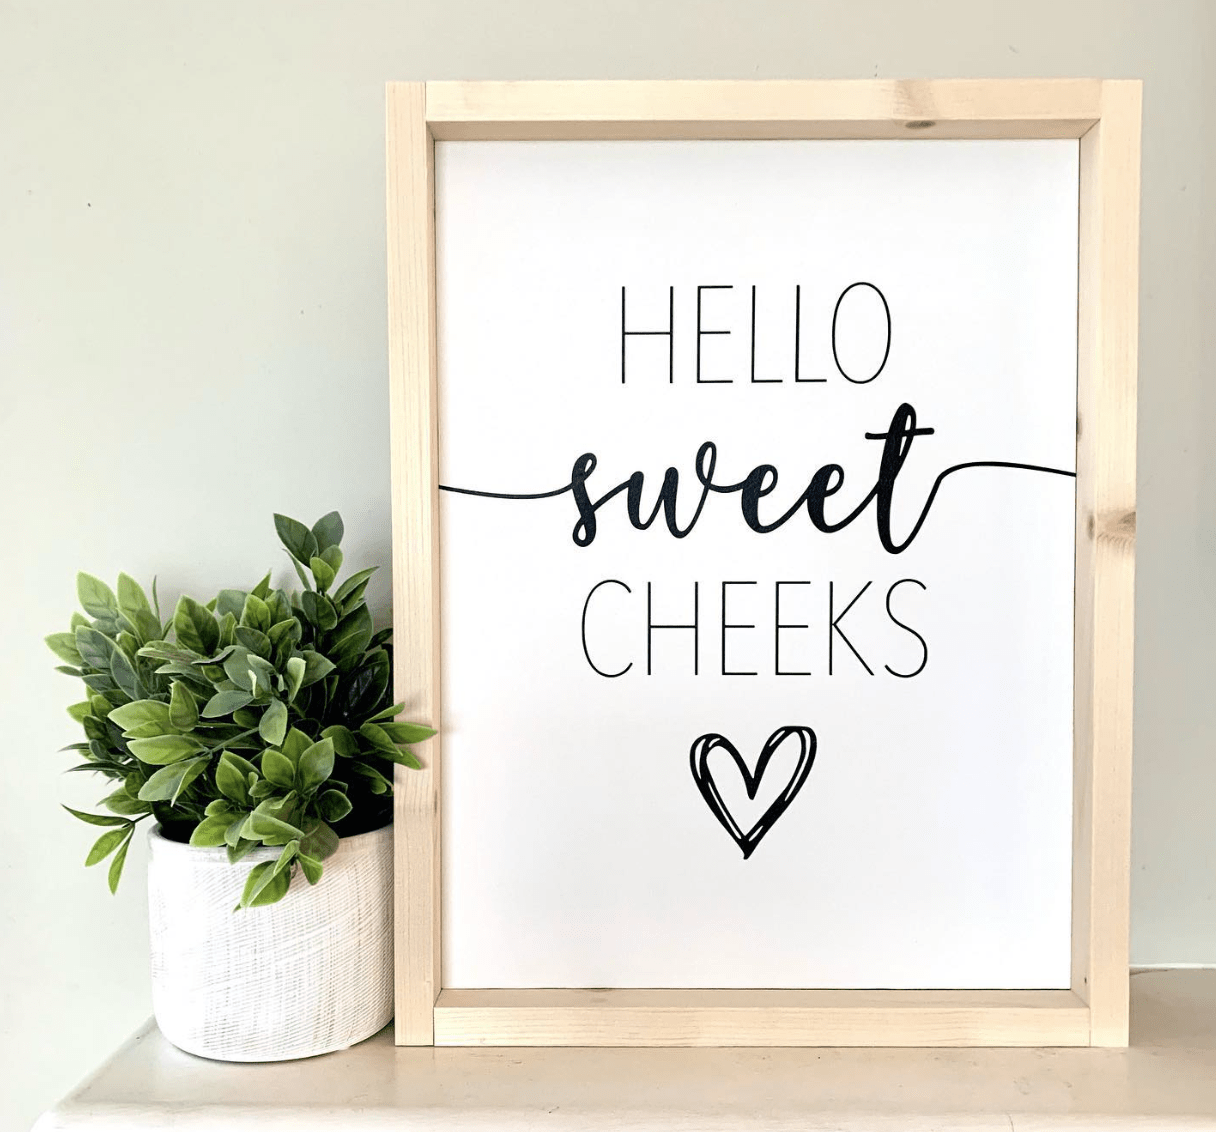 hello sweet cheeks framed wood sign with white background greenery